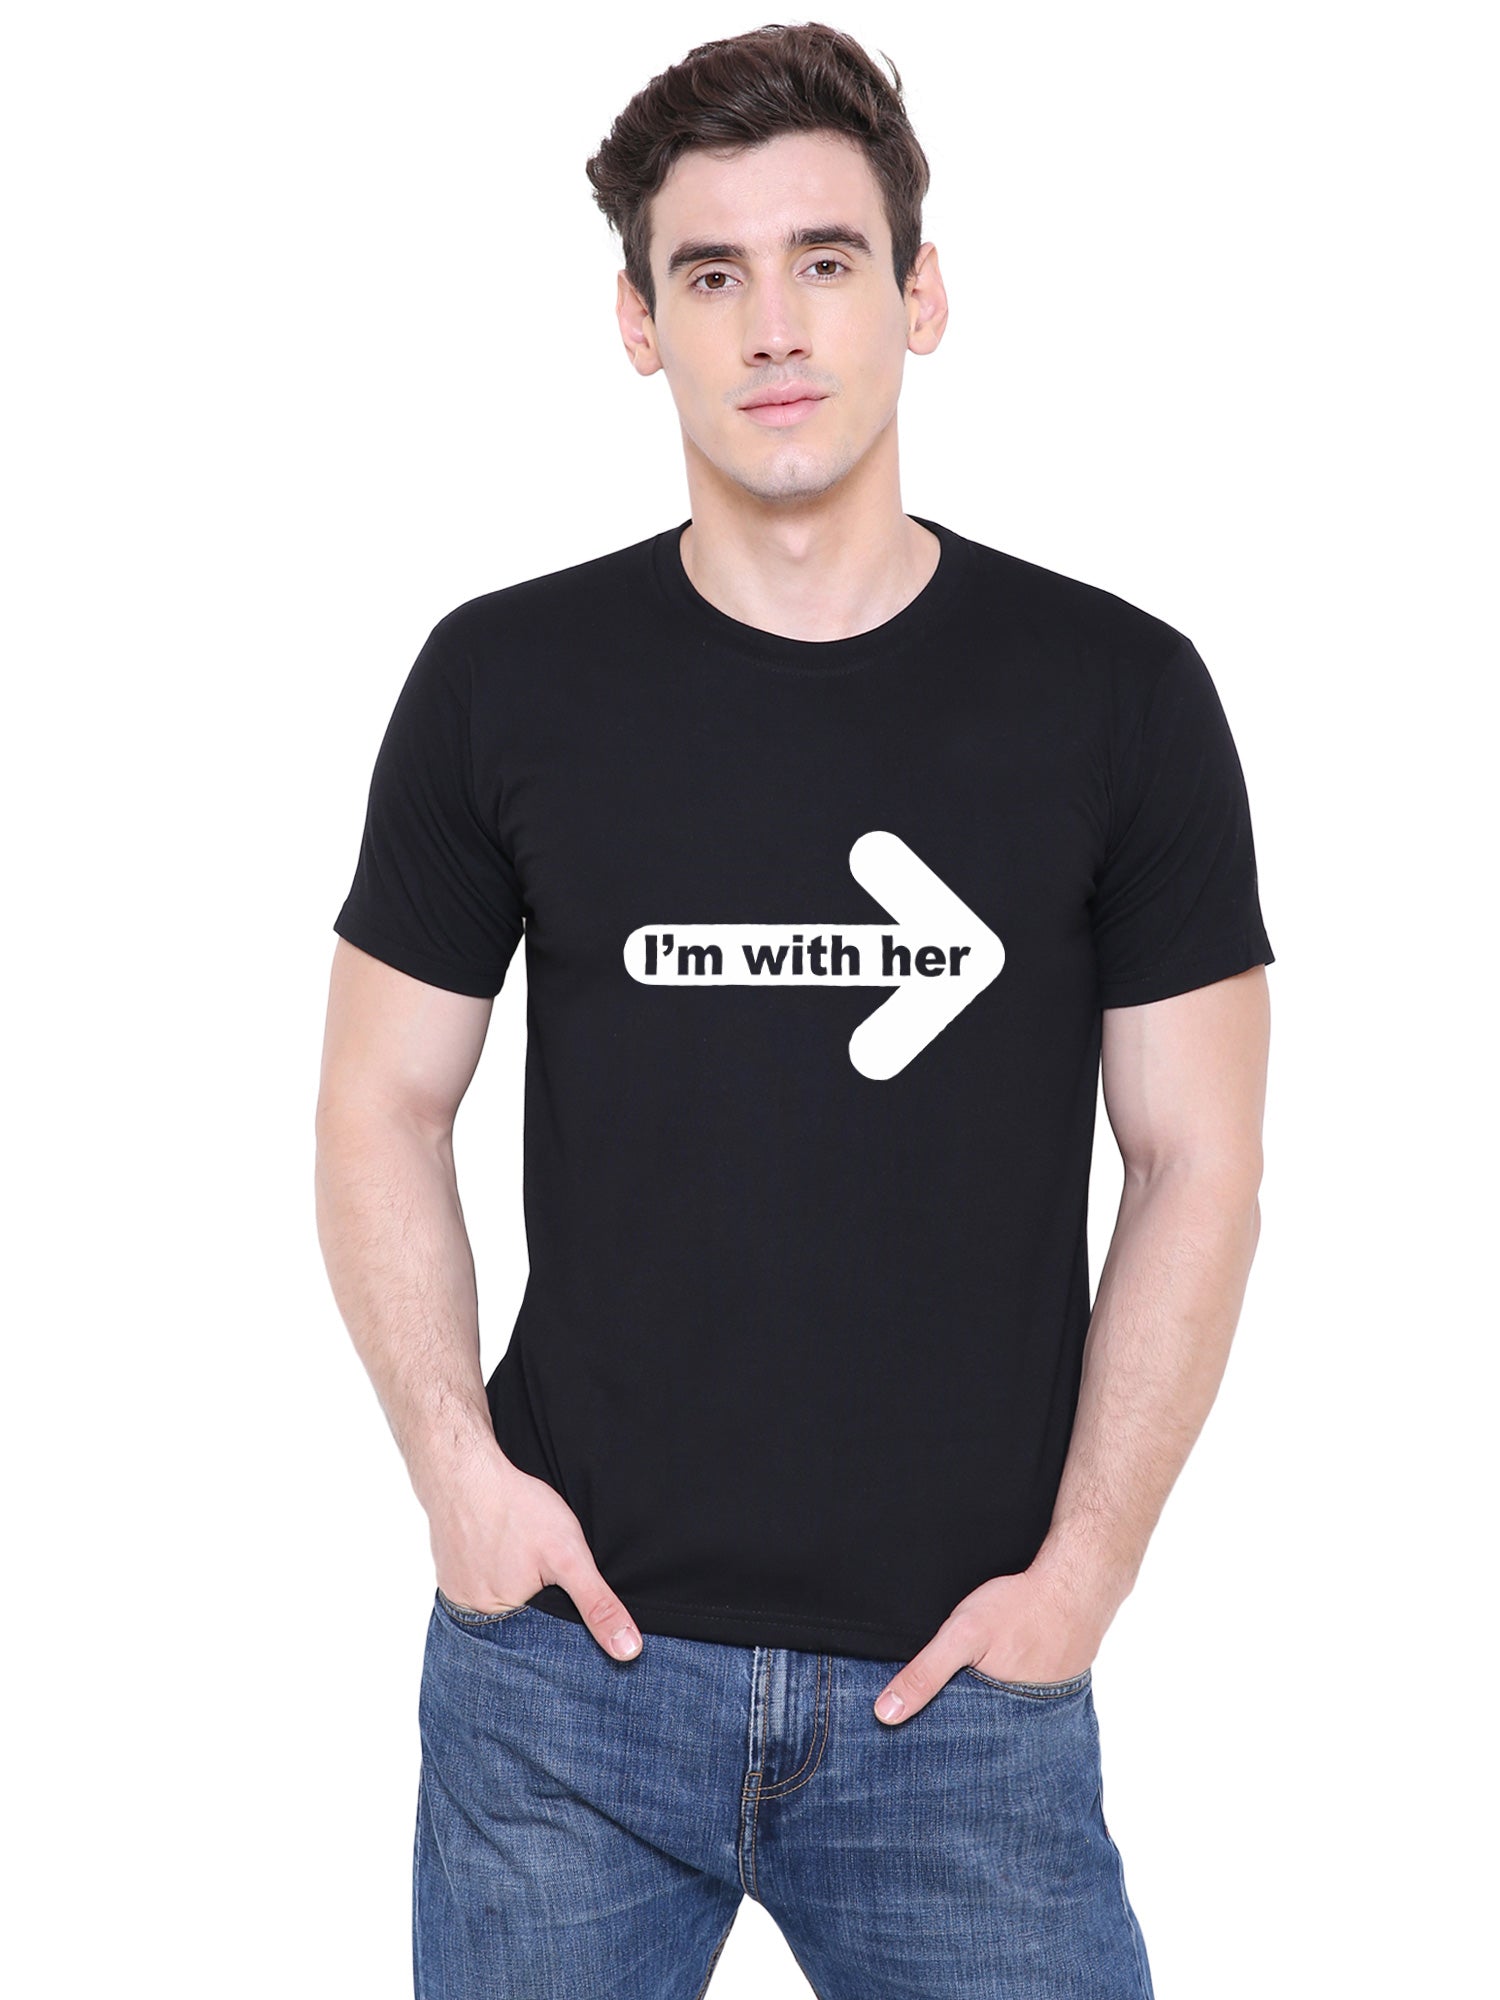 With him & her matching Couple T shirts- Black